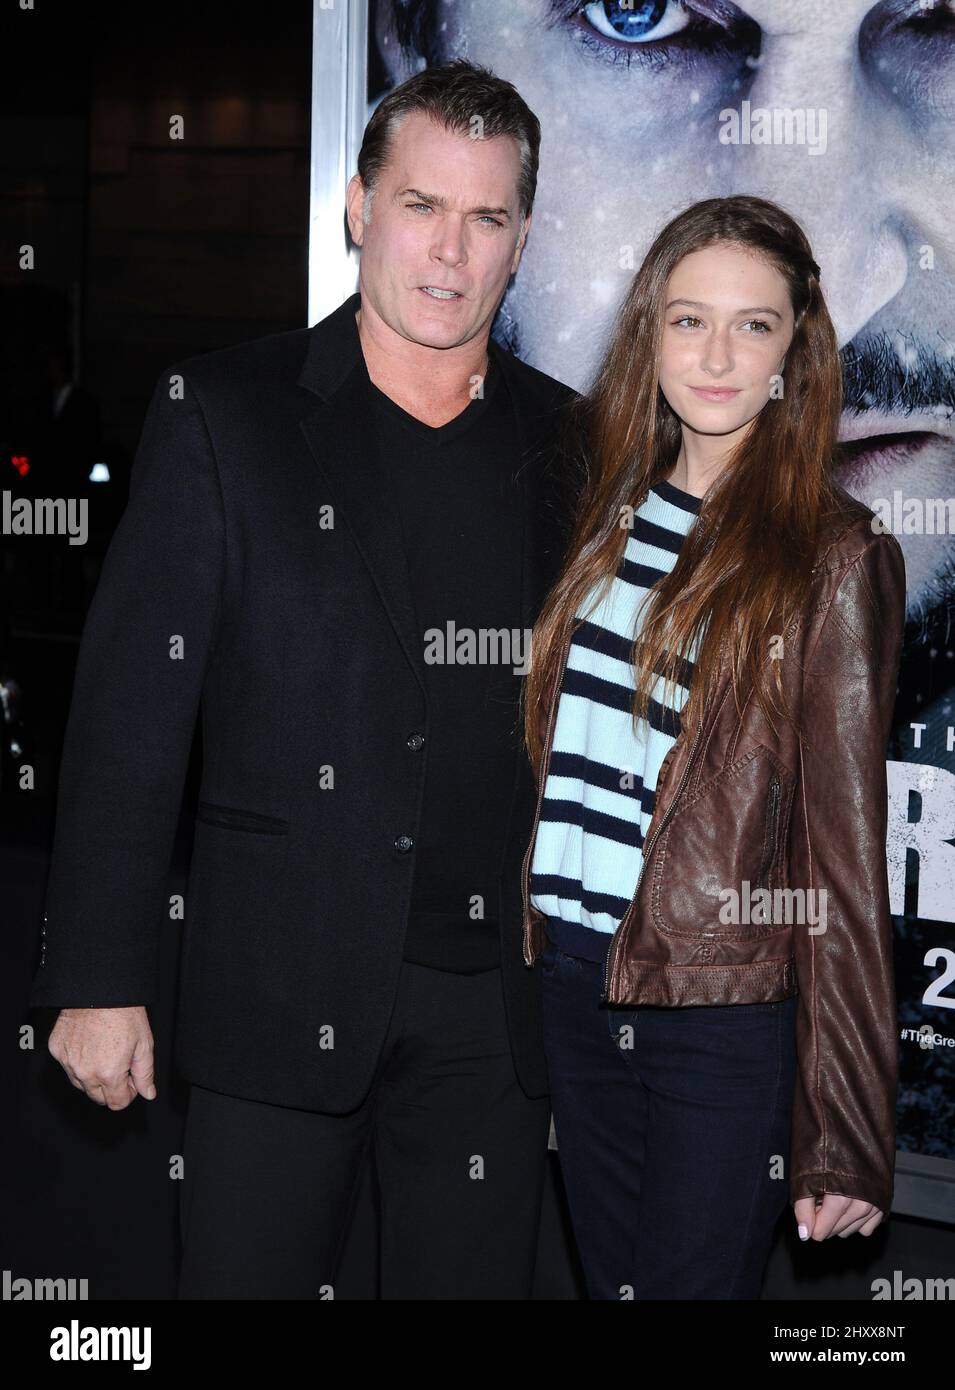 Ray Liotta and daughter Karsen Liotta at the world premiere of "The Grey" at The Regency Cinemas, Los Angeles Stock Photo